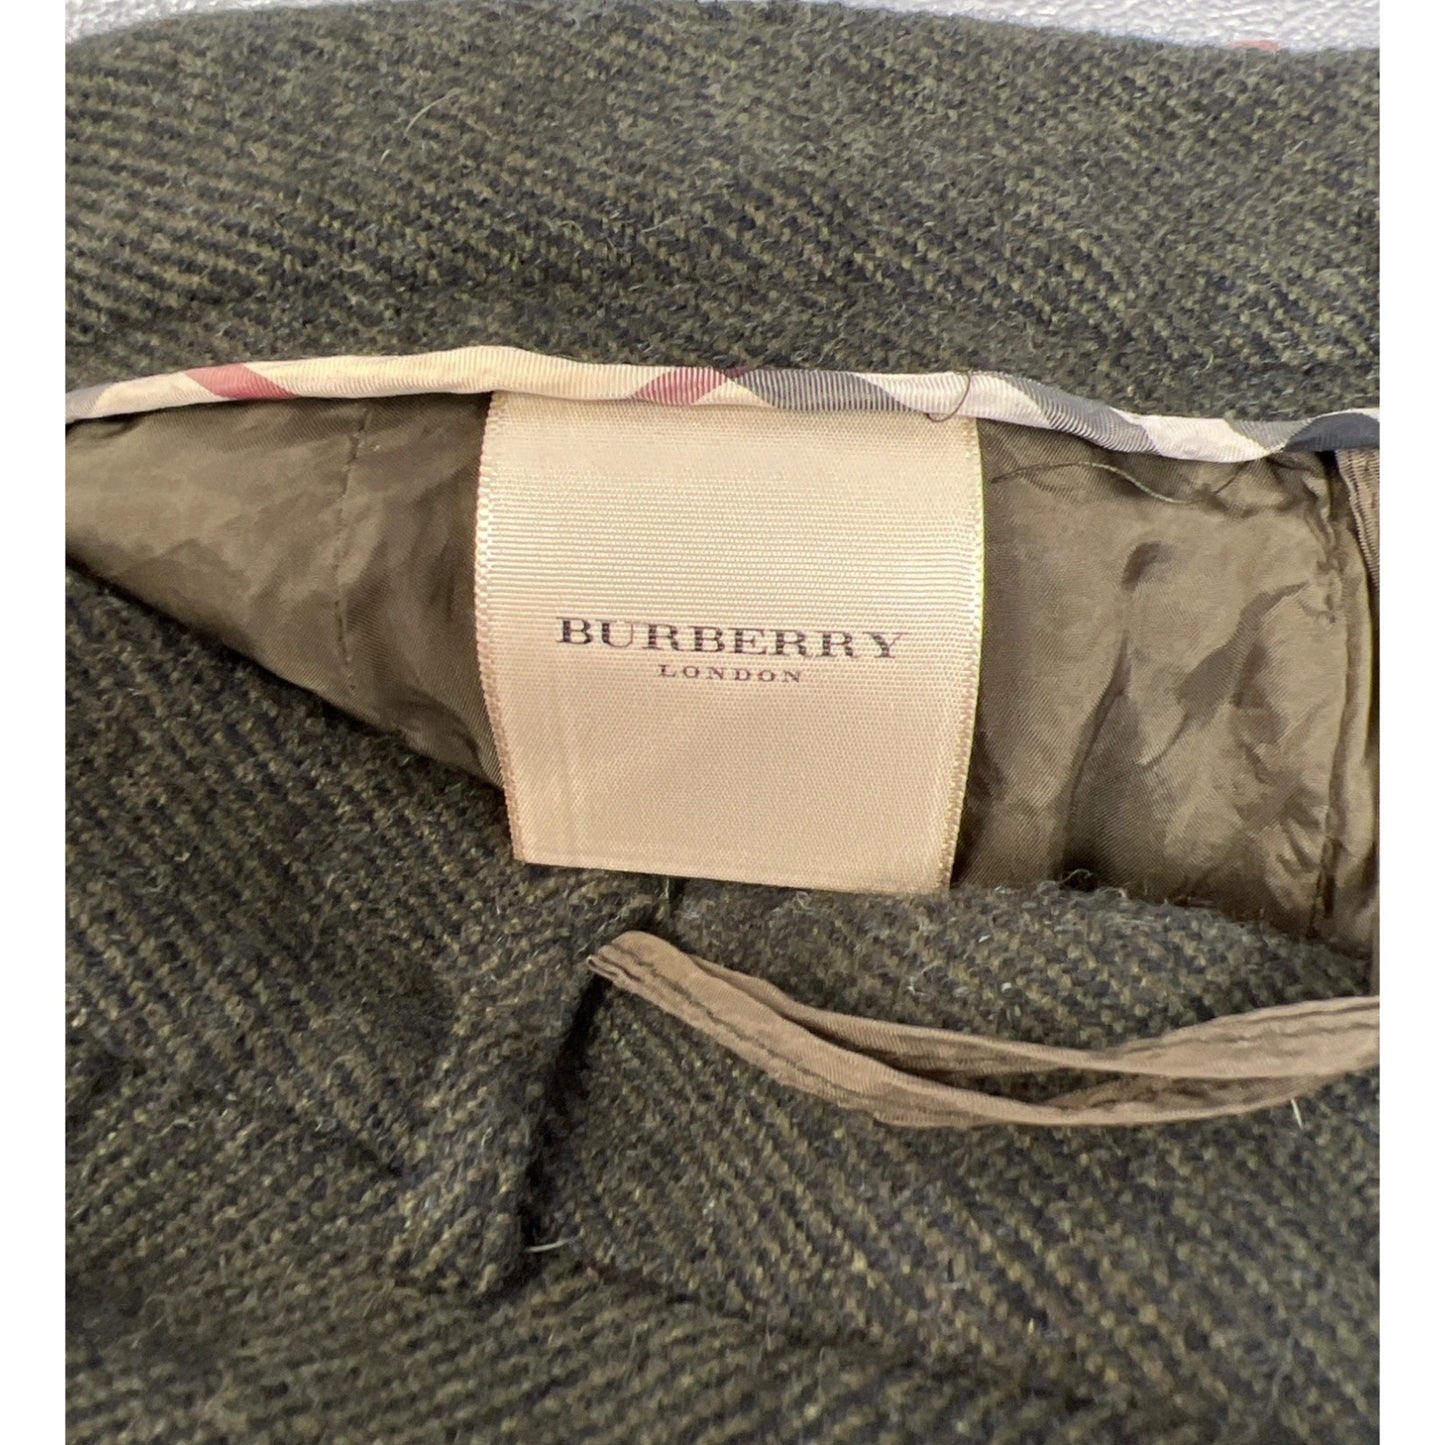 Burberry of London 100% Wool Olive Green Trousers